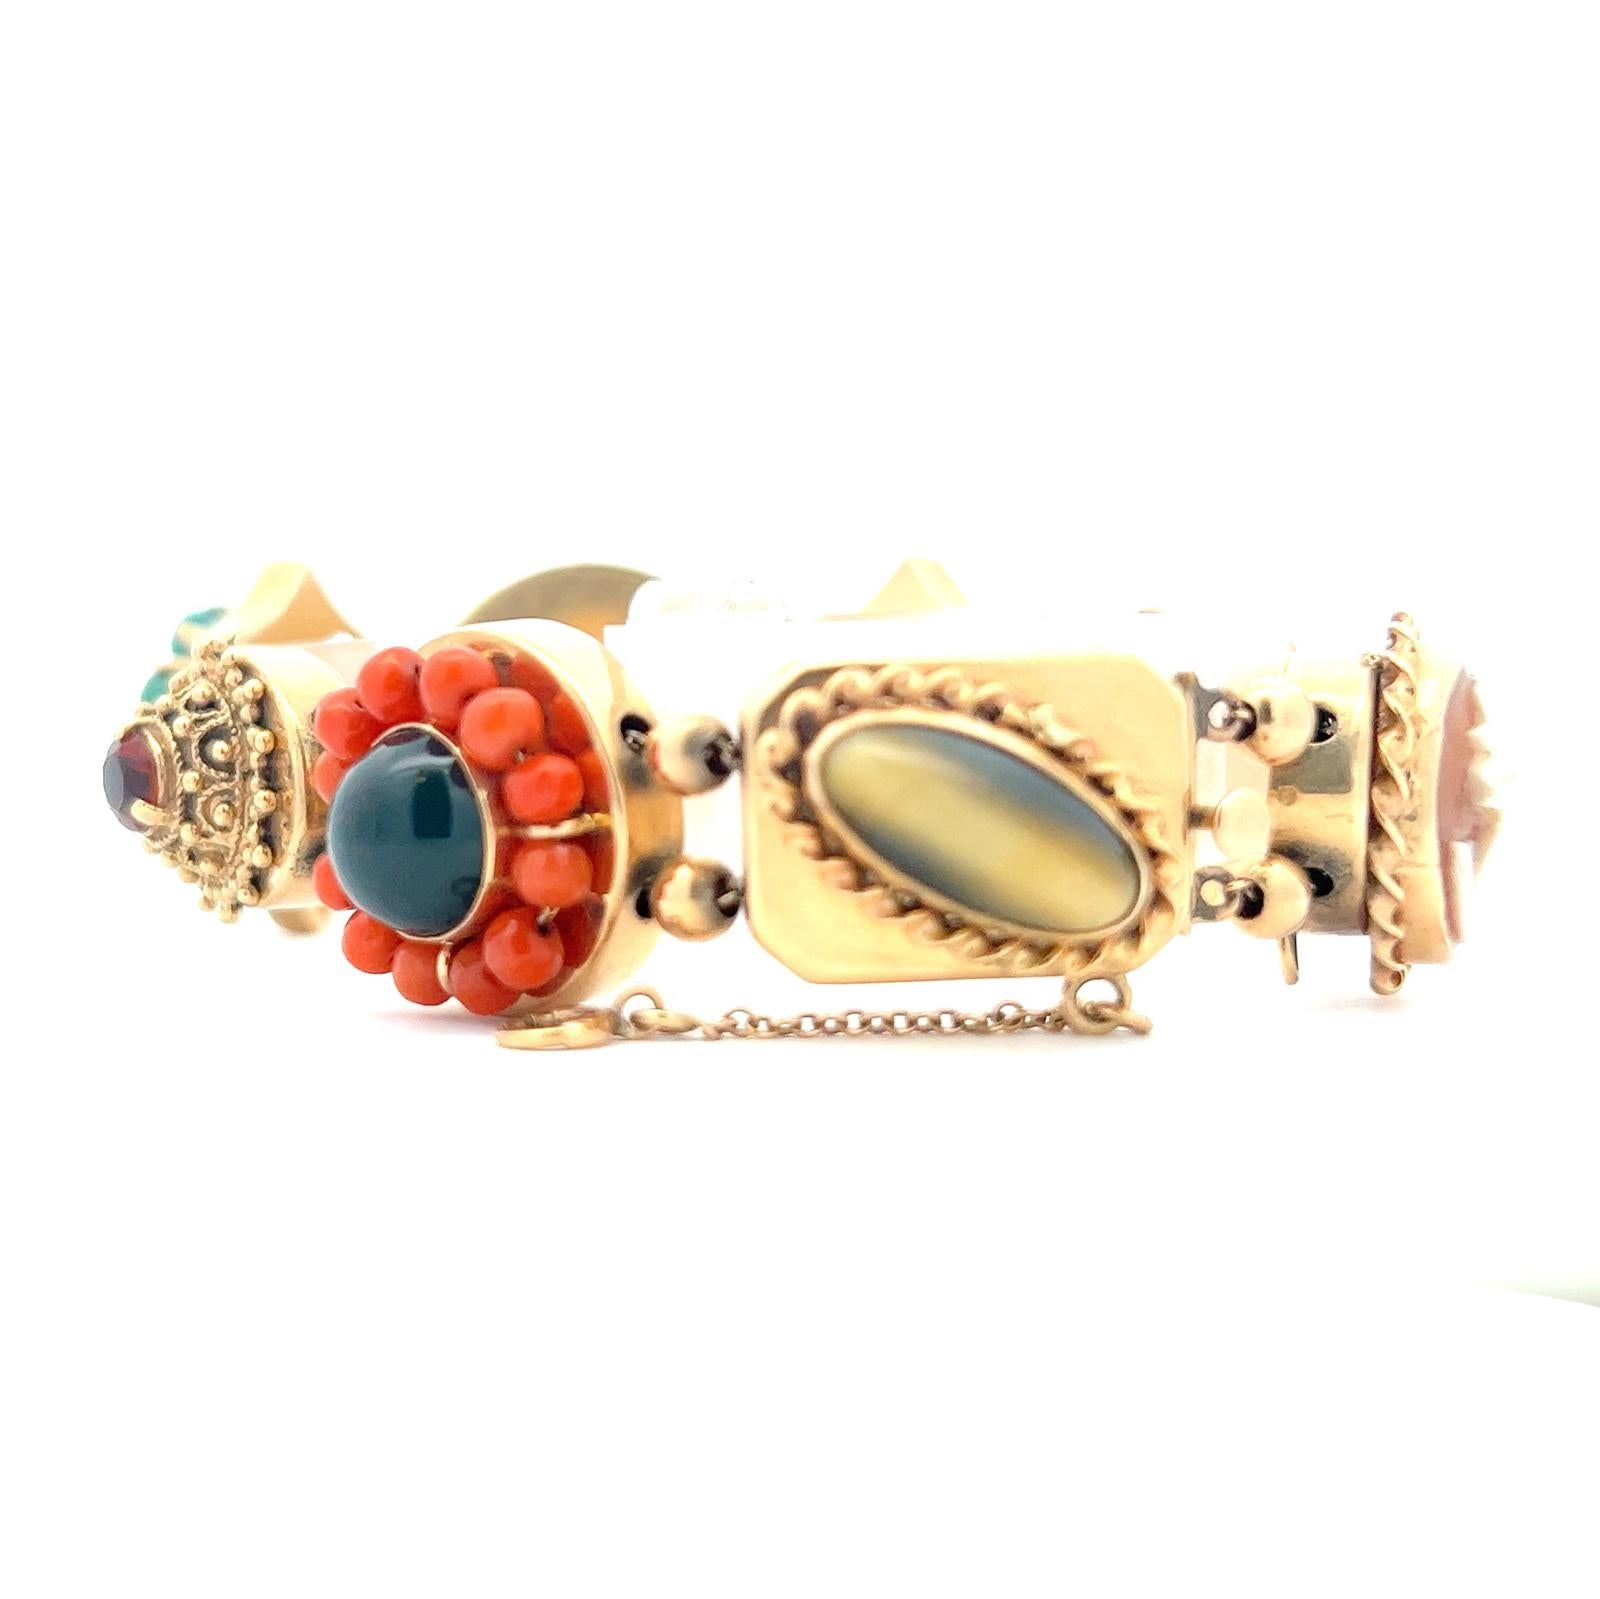 Cabochon Coral Turquoise Butterfly Cameo 14 Karat Yellow Gold Vintage Slide Bracelet